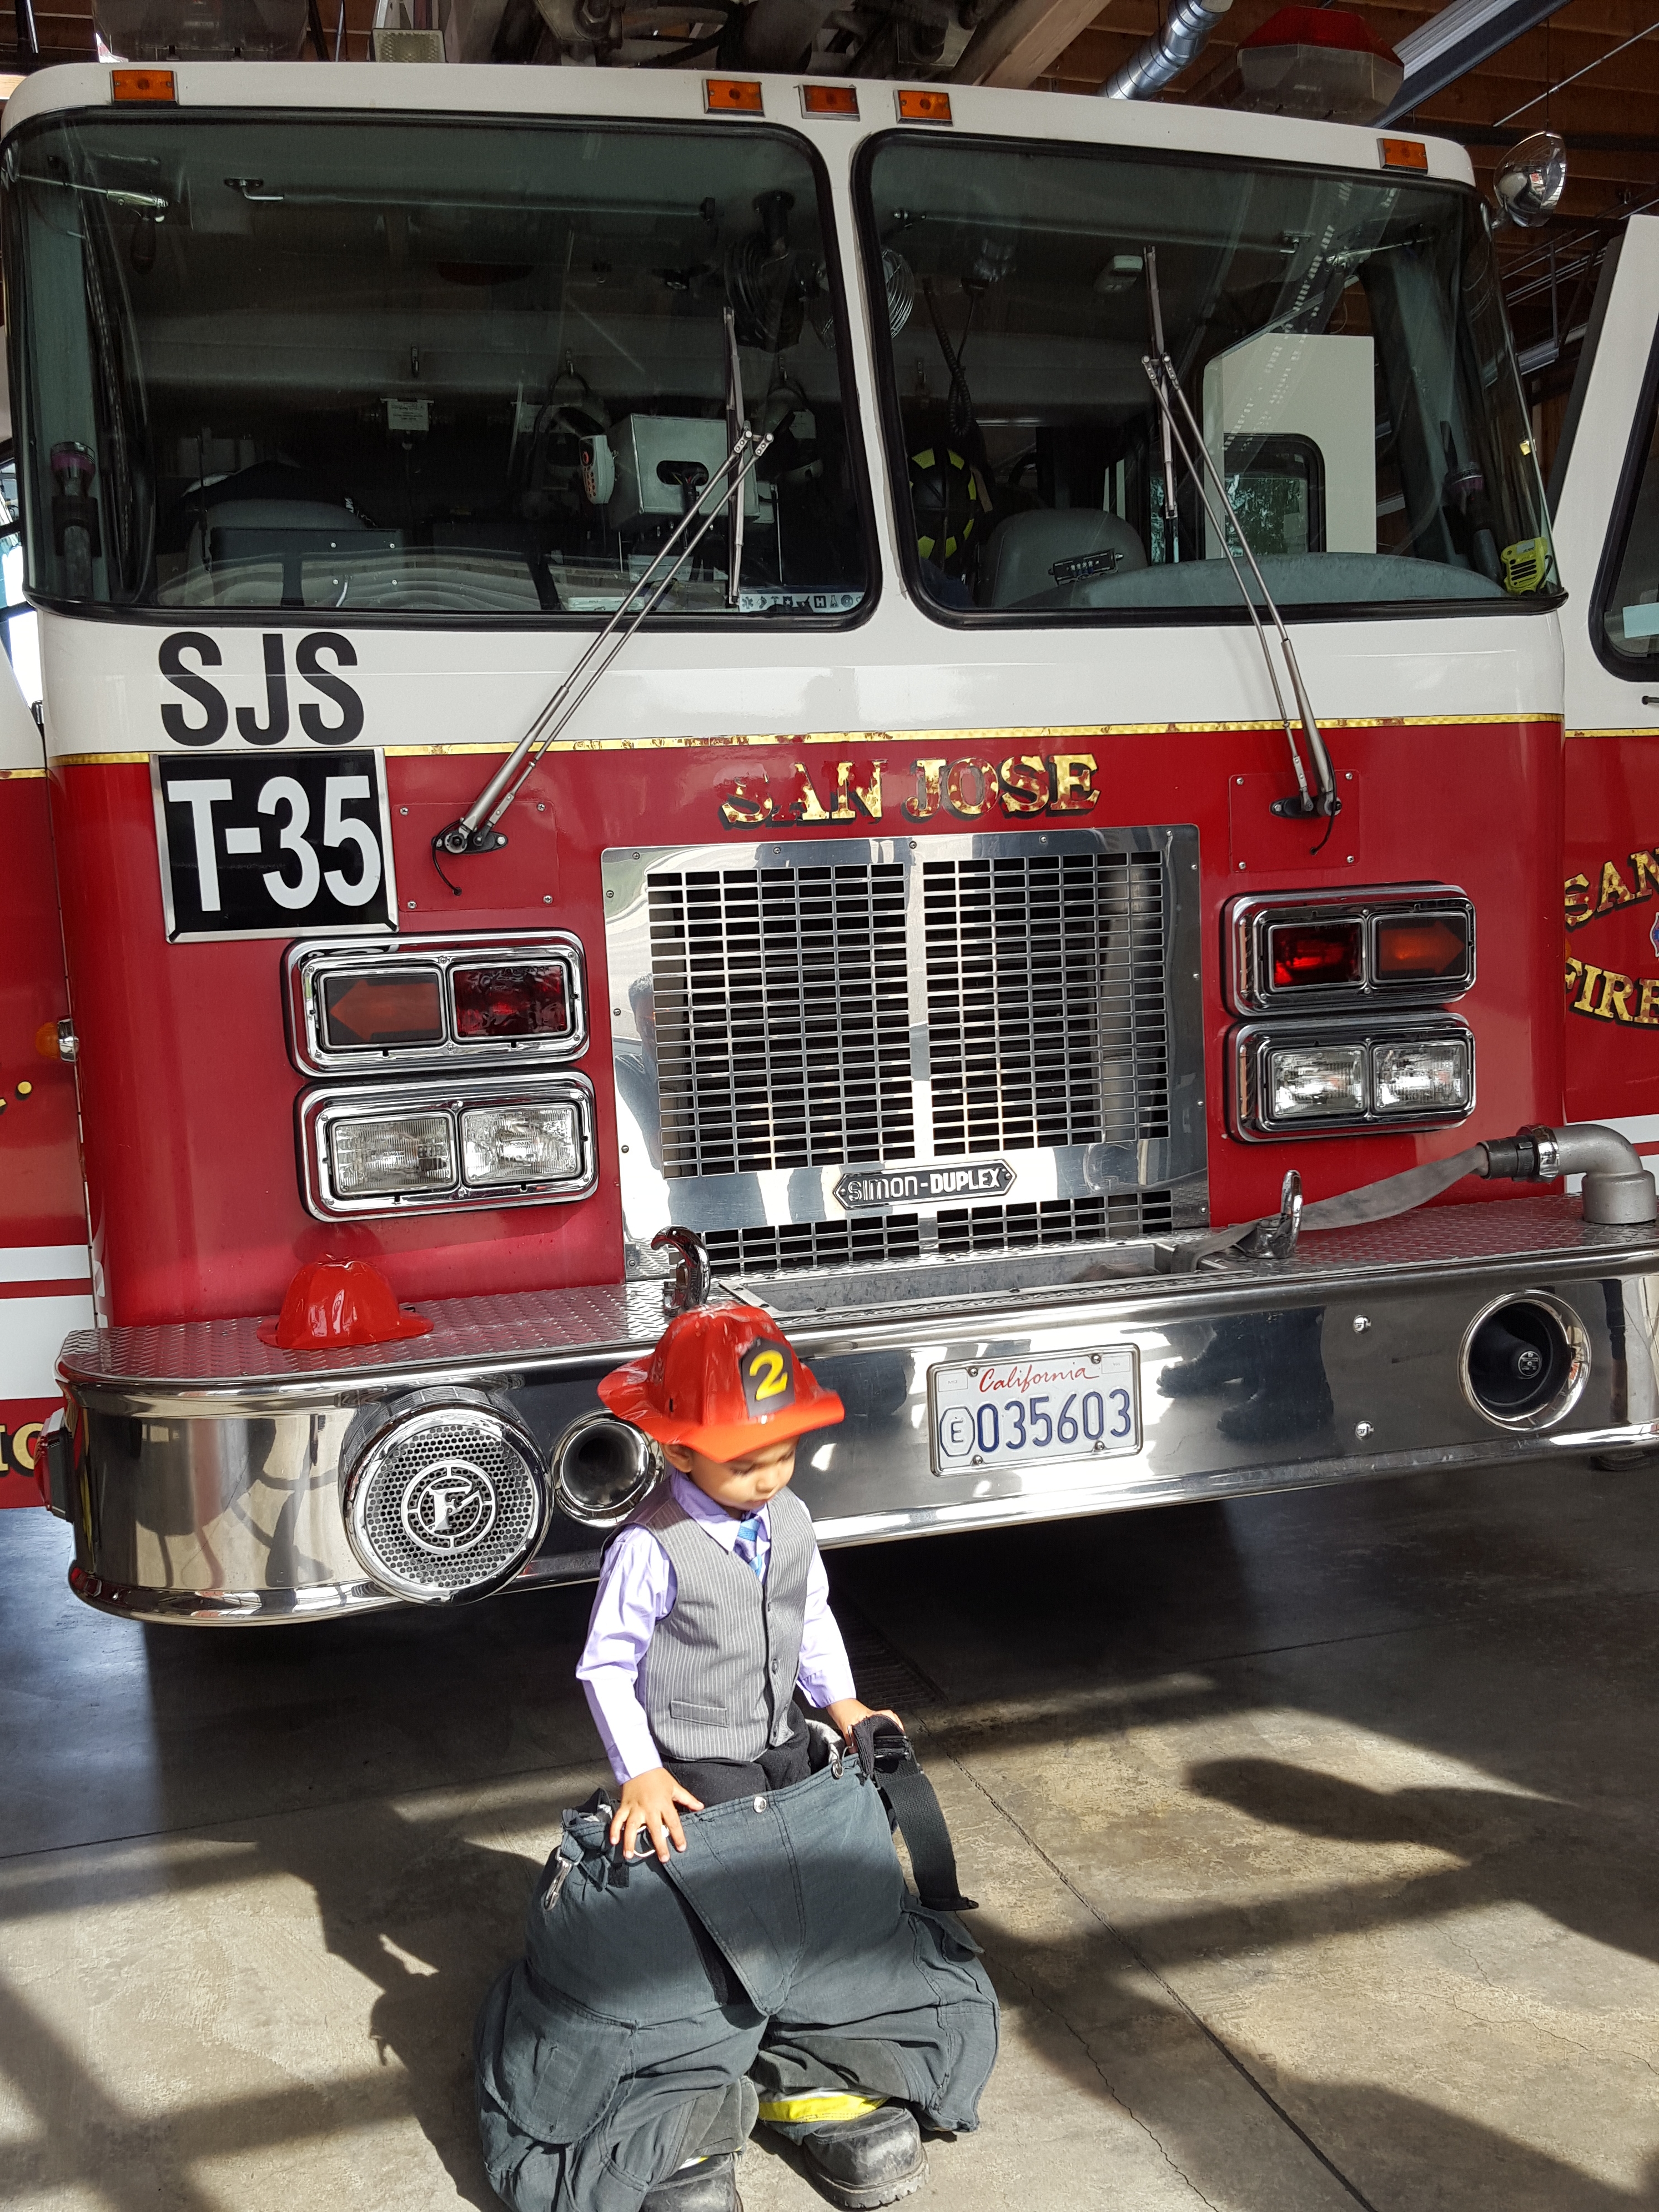 Baby S turns 2 - Visiting the fire station